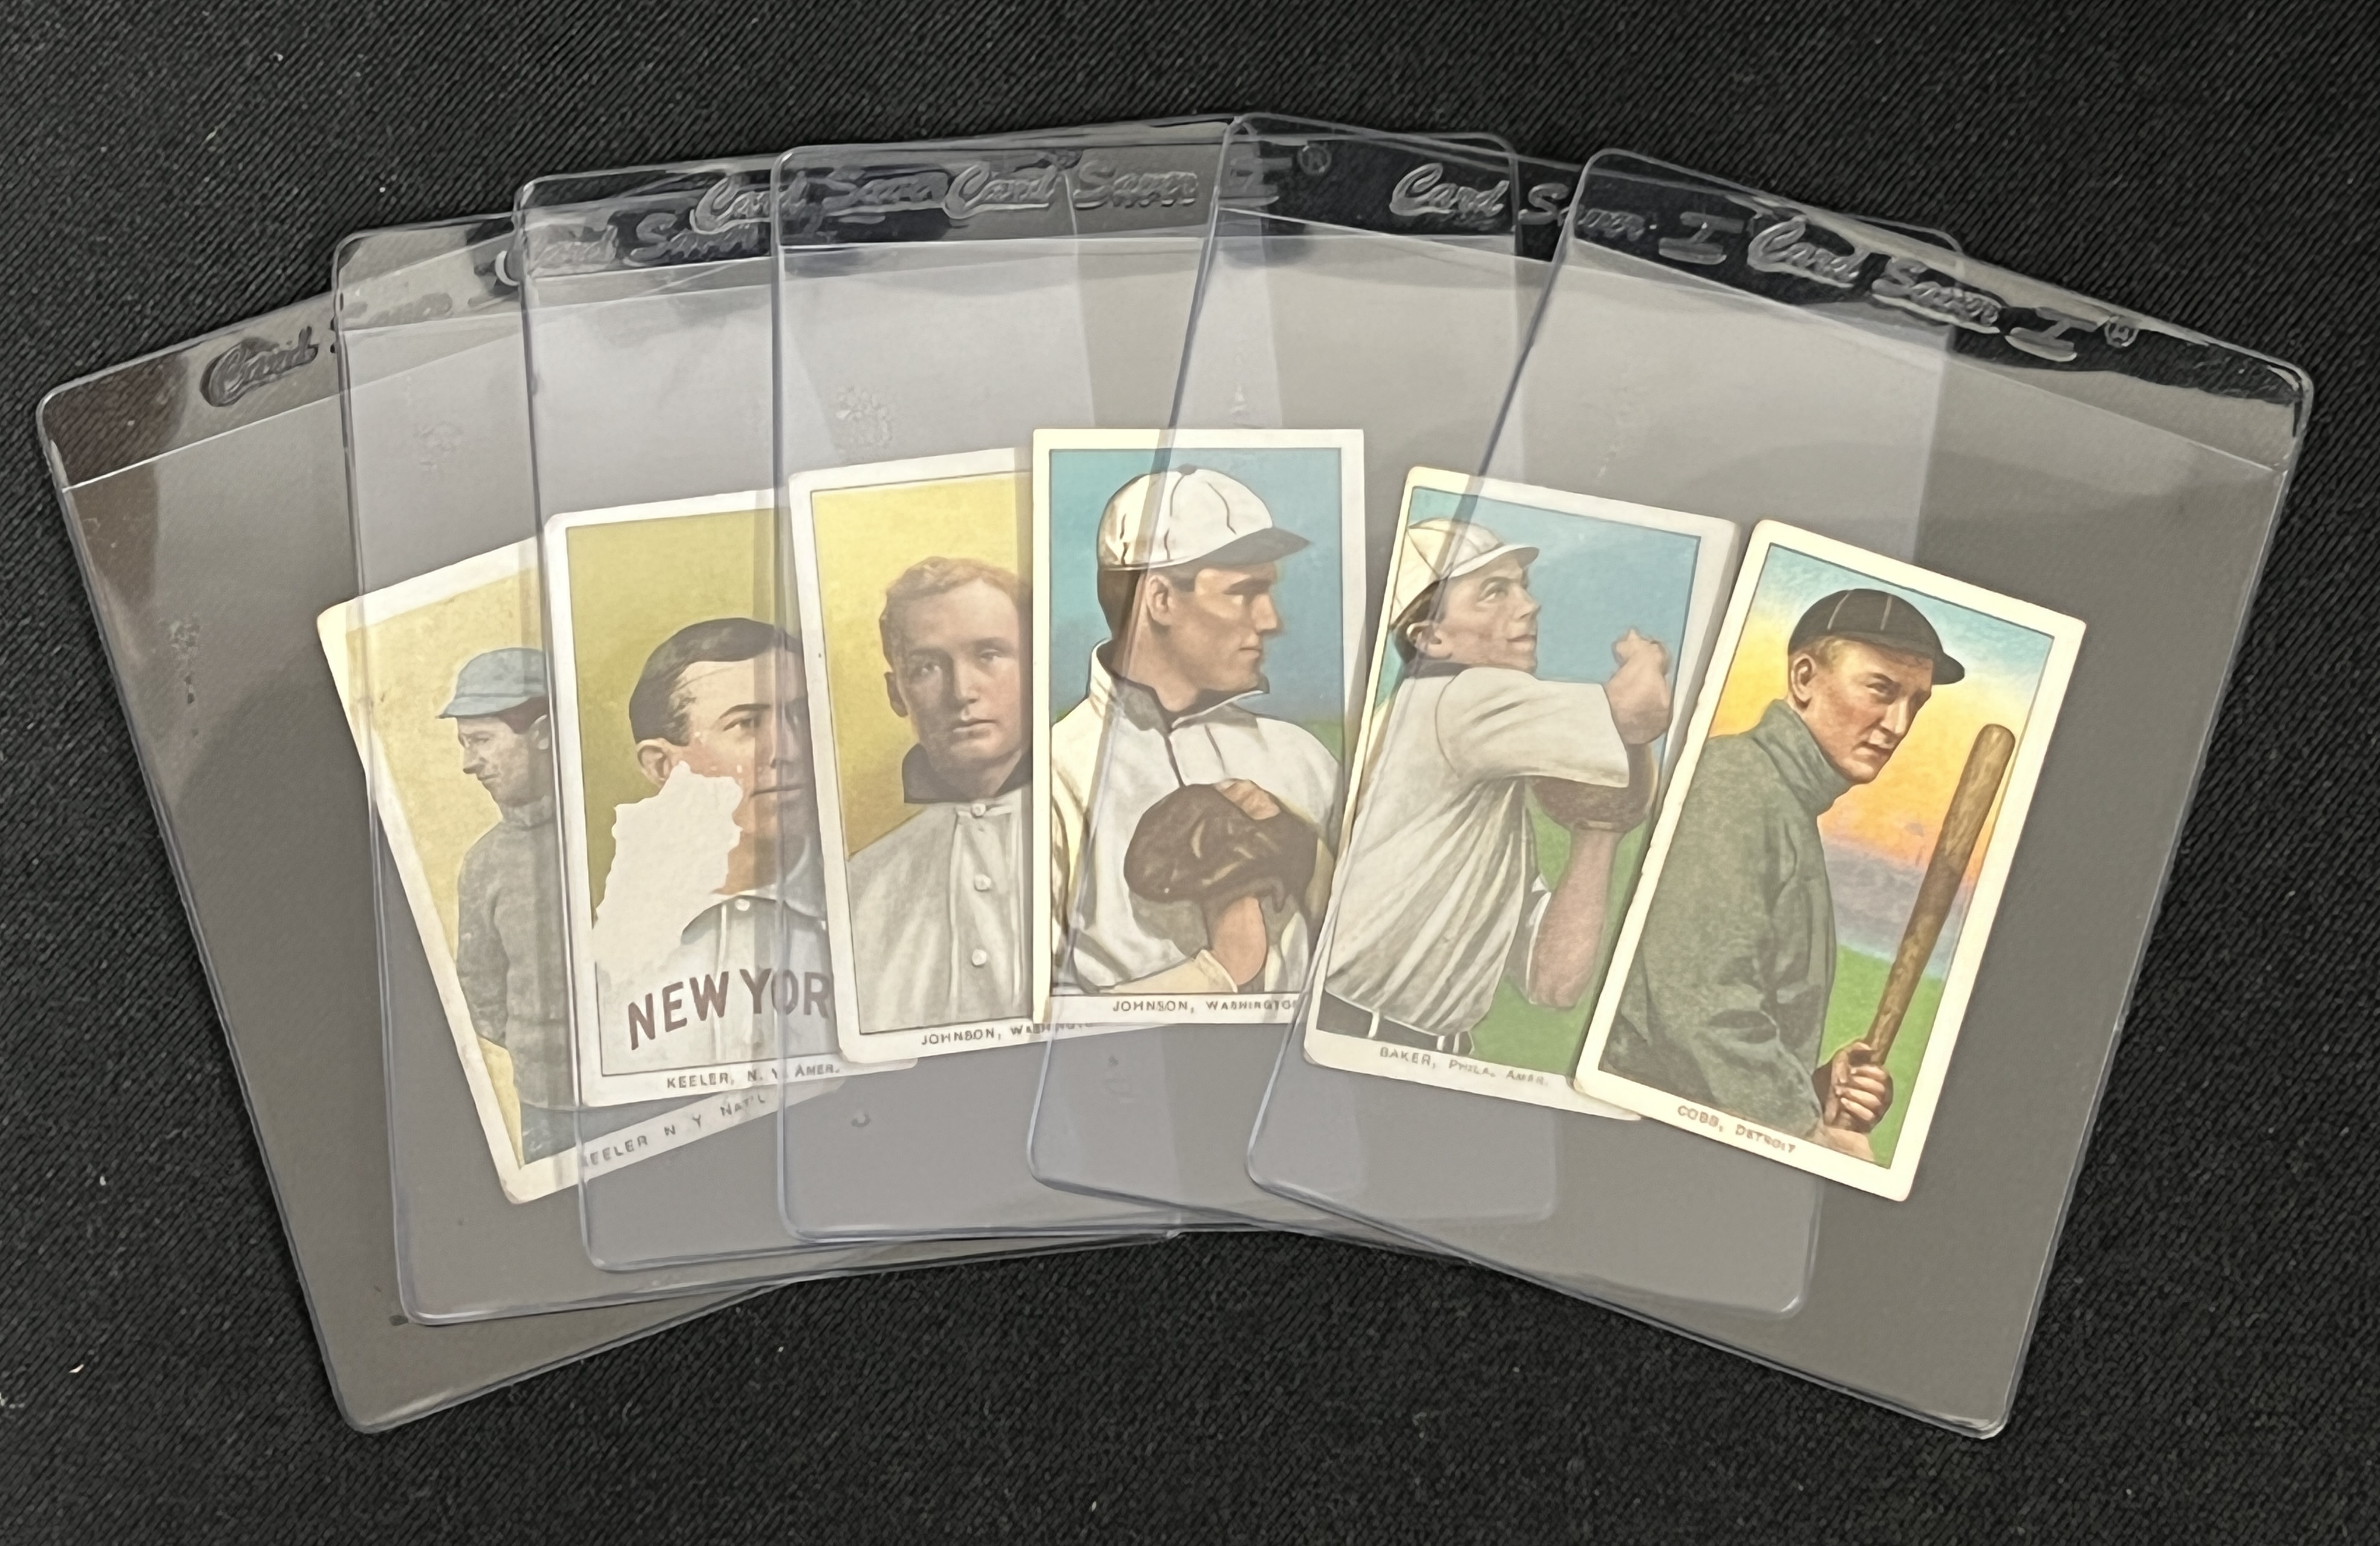 A Collector's Dream: 7 Rare Ty Cobb Baseball Cards Discovered